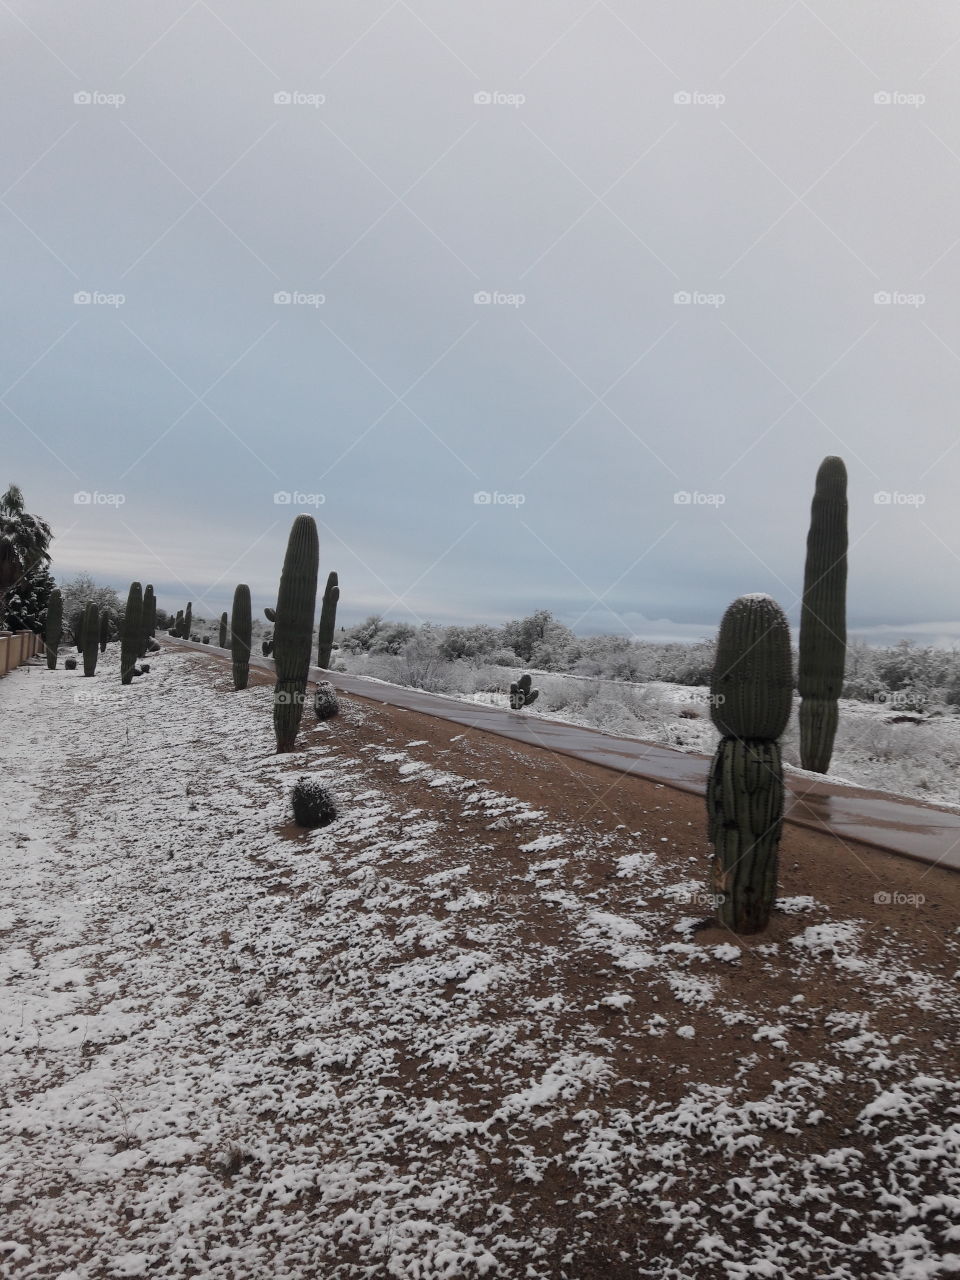 Cacti in the snow